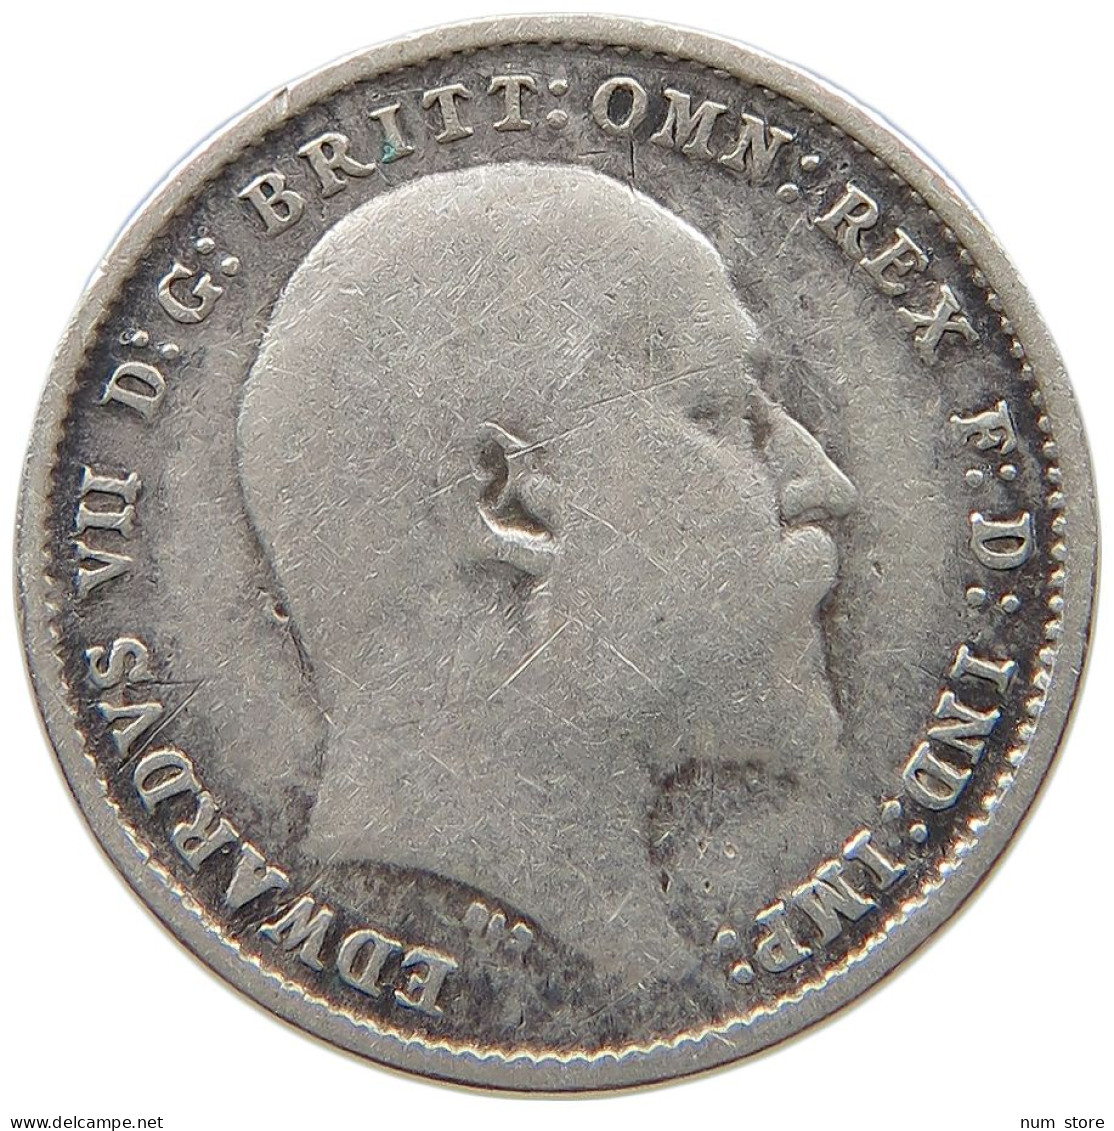 GREAT BRITAIN THREEPENCE 1906 Edward VII., 1901 - 1910 #a033 0177 - F. 3 Pence